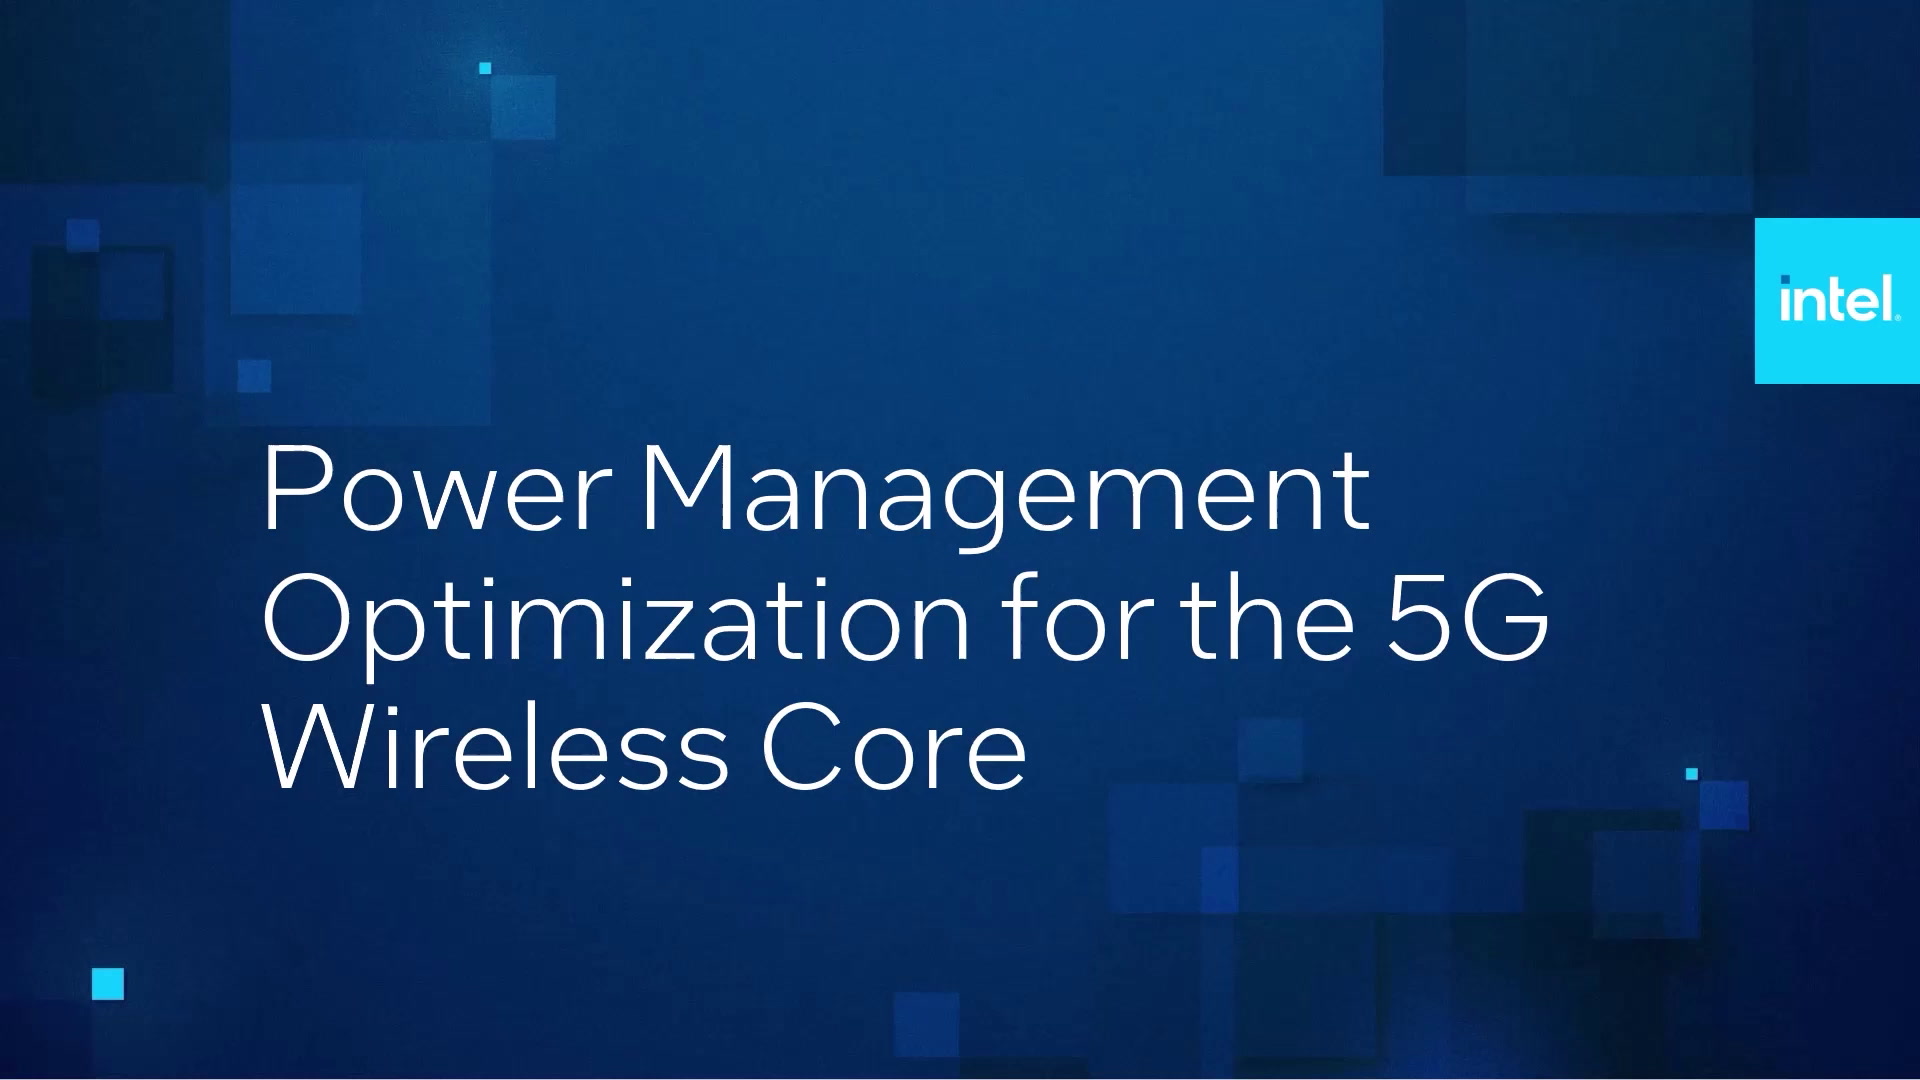 Power Management Optimization for the 5G Wireless Core